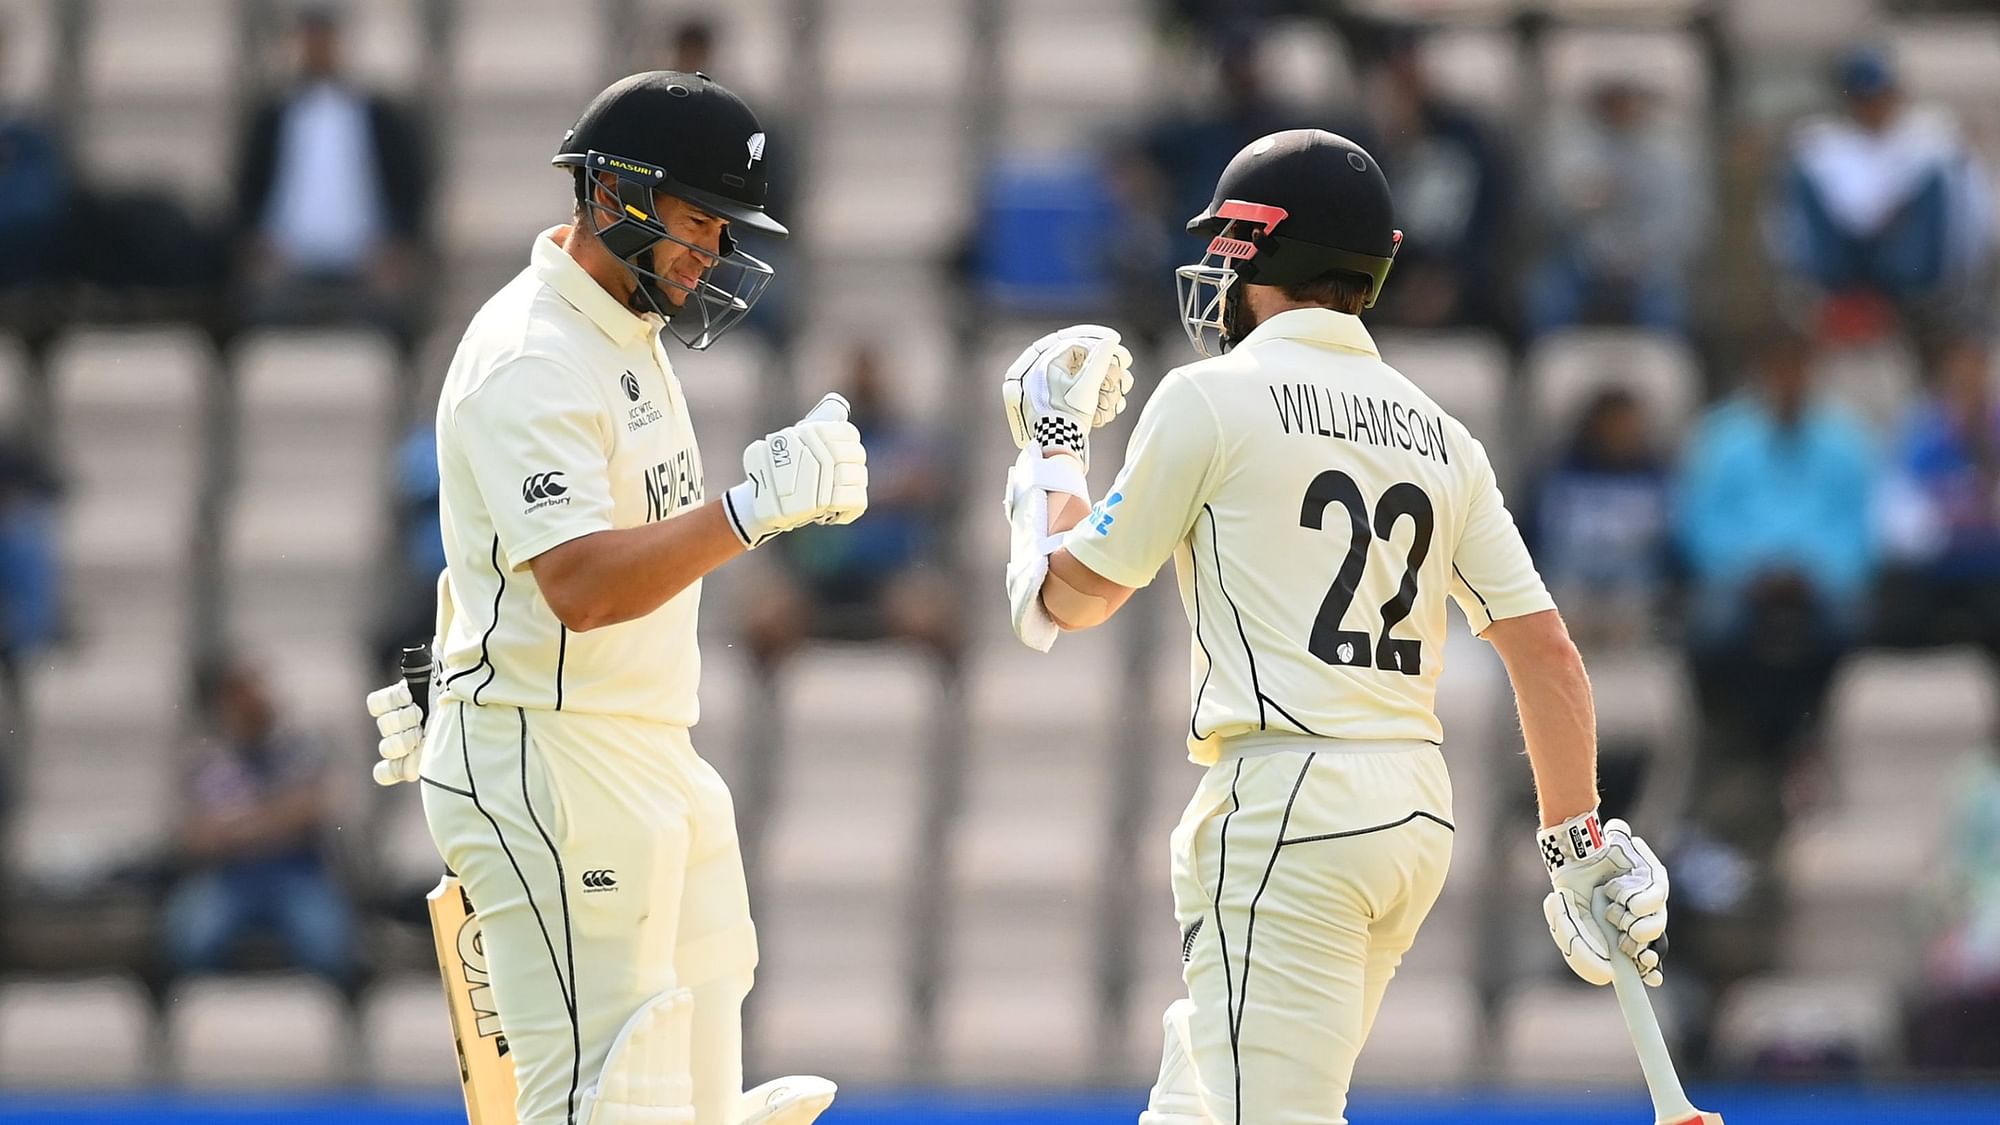 Ross Taylor and Kane Williamson share a light moment during their chase against India in the WTC Final.&nbsp;